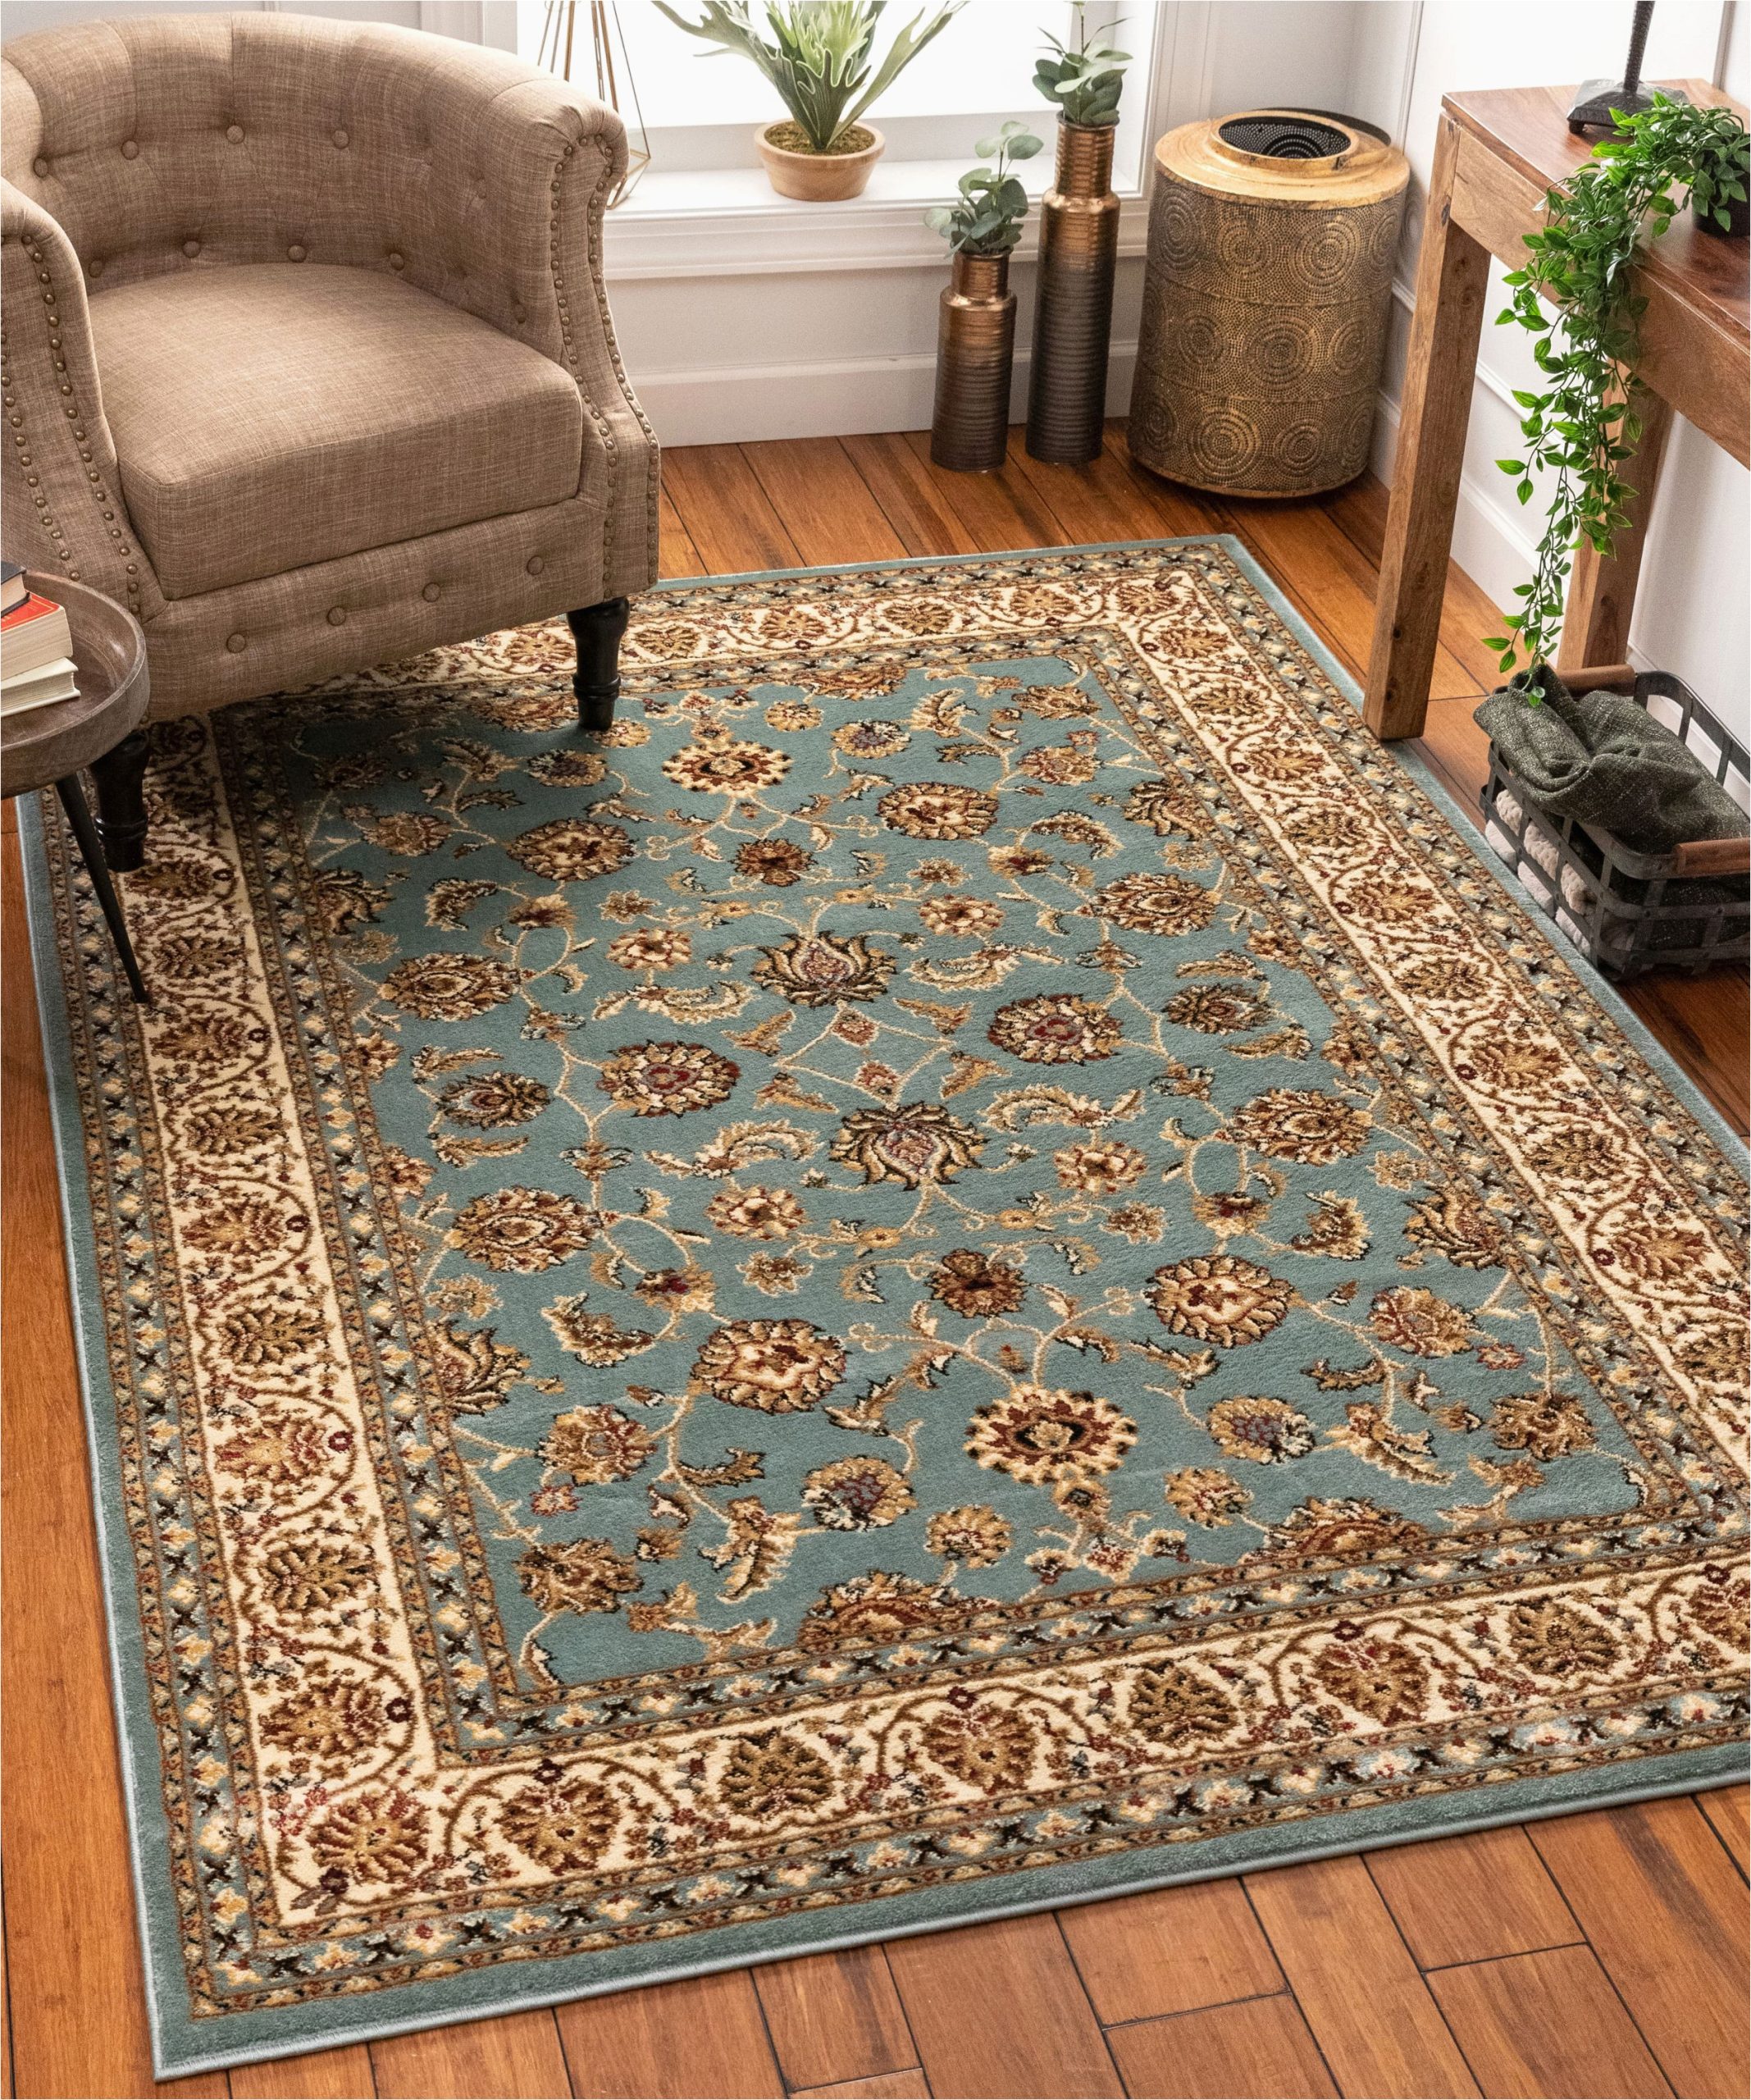 Traditional area Rugs for Dining Room Well Woven Barclay oriental Persian area Rugs, Blue – Walmart.com